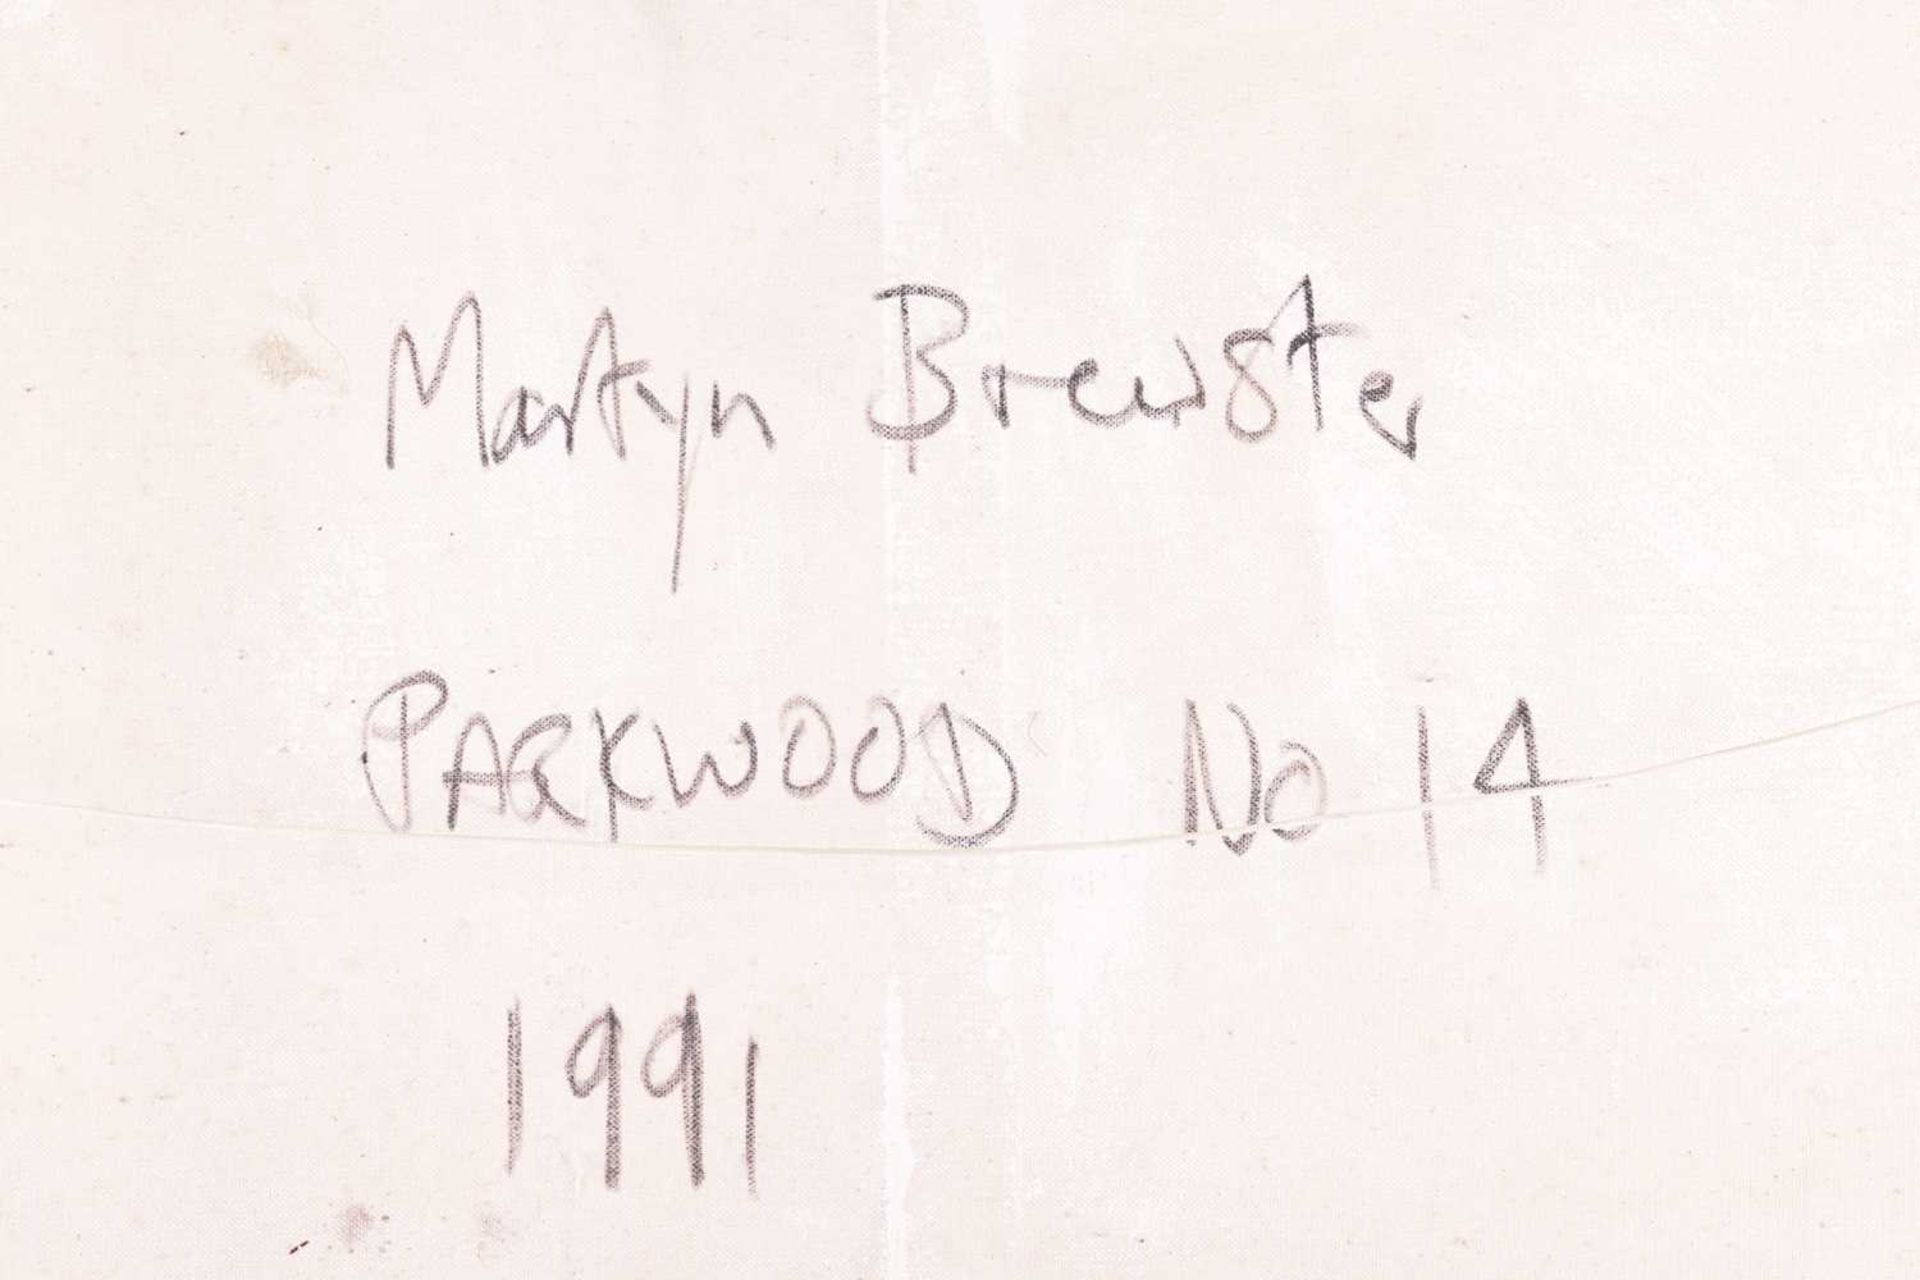 Martyn Brewster(b.1952), 'Parkwood No.14' (1991), signed 'Martyn Brewster' and titled on the reverse - Image 8 of 8